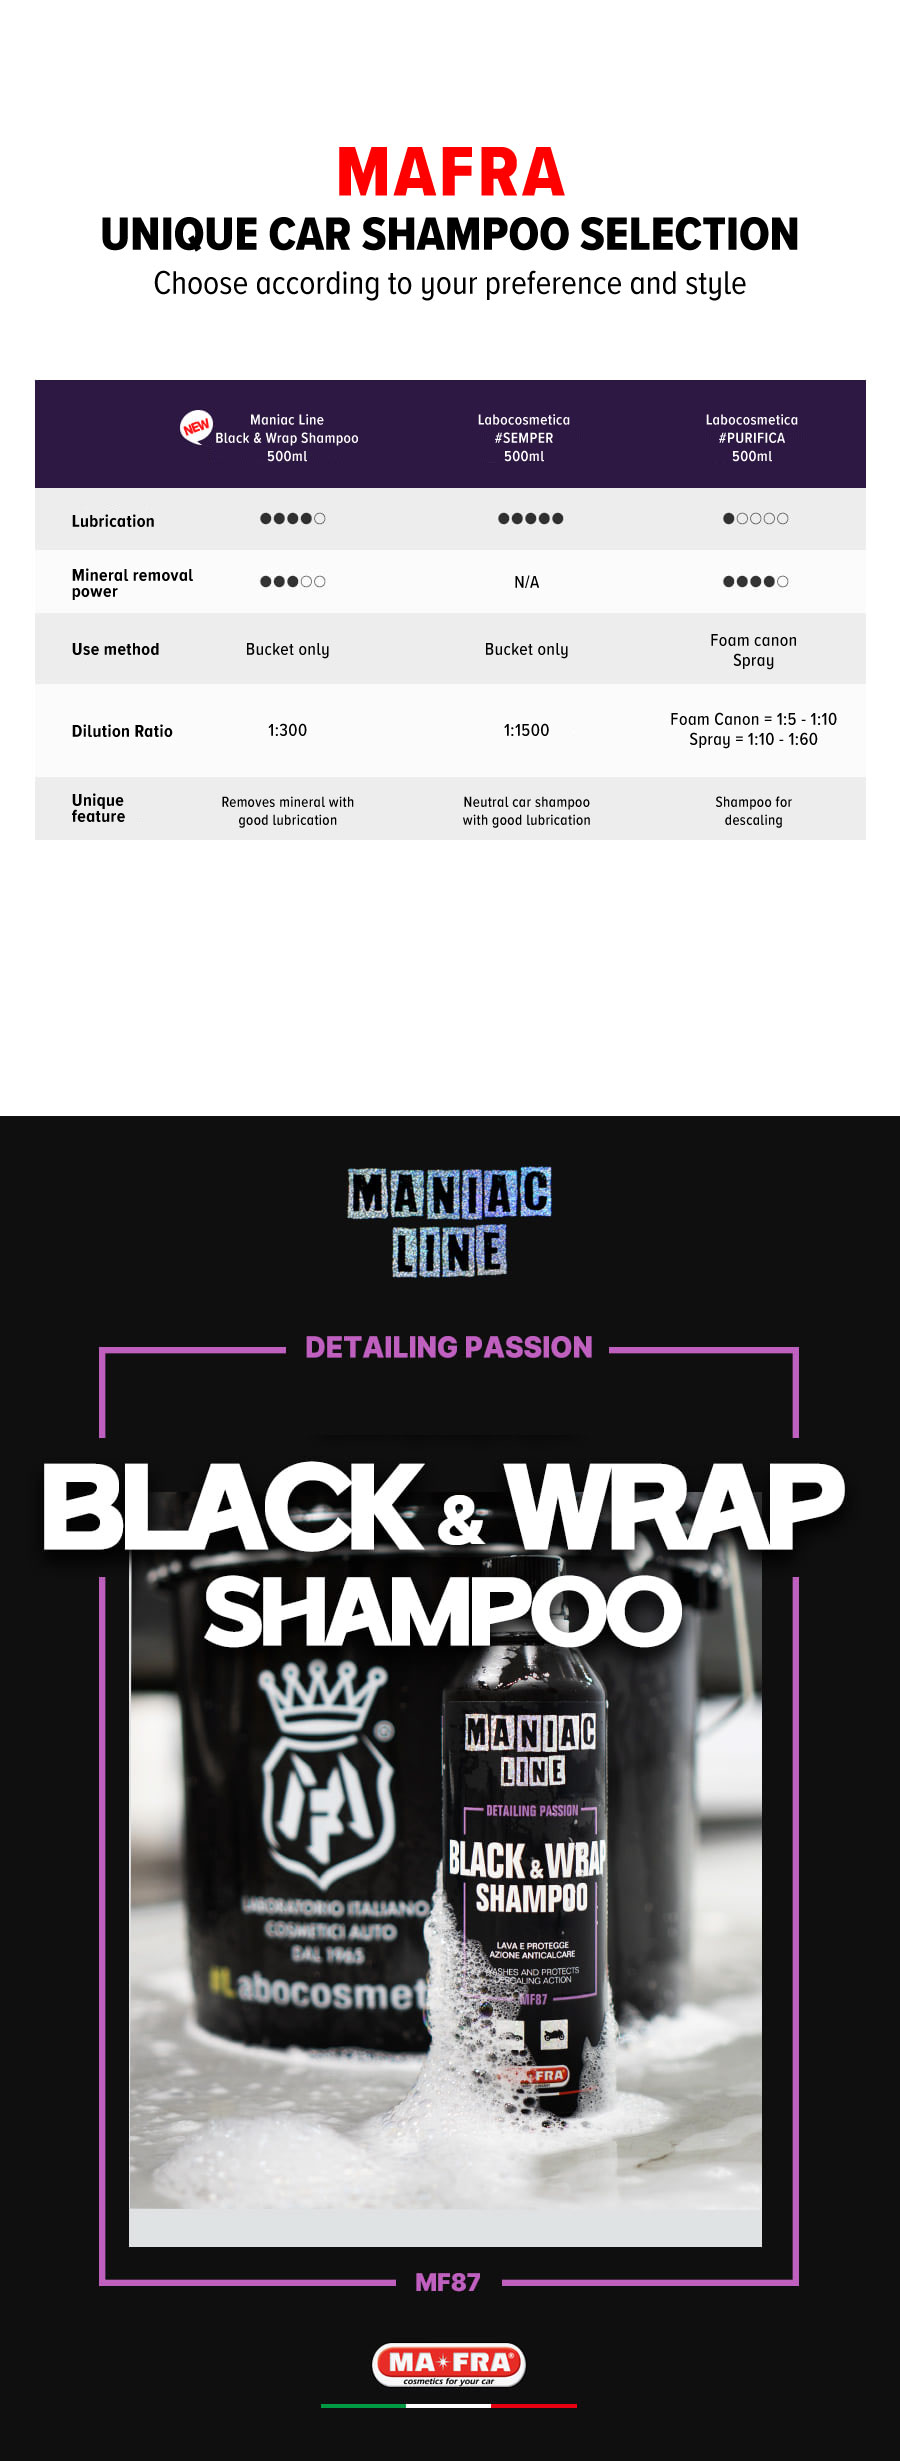 Mafra Maniac Line Black and Wrap Shampoo 500ml (Special formulated 2 in 1 Revitalise Rejuvenate Anti Limescale for Dark Colour Black PPF Matte Film Coated Cars) - Mafra Official Store Singapore